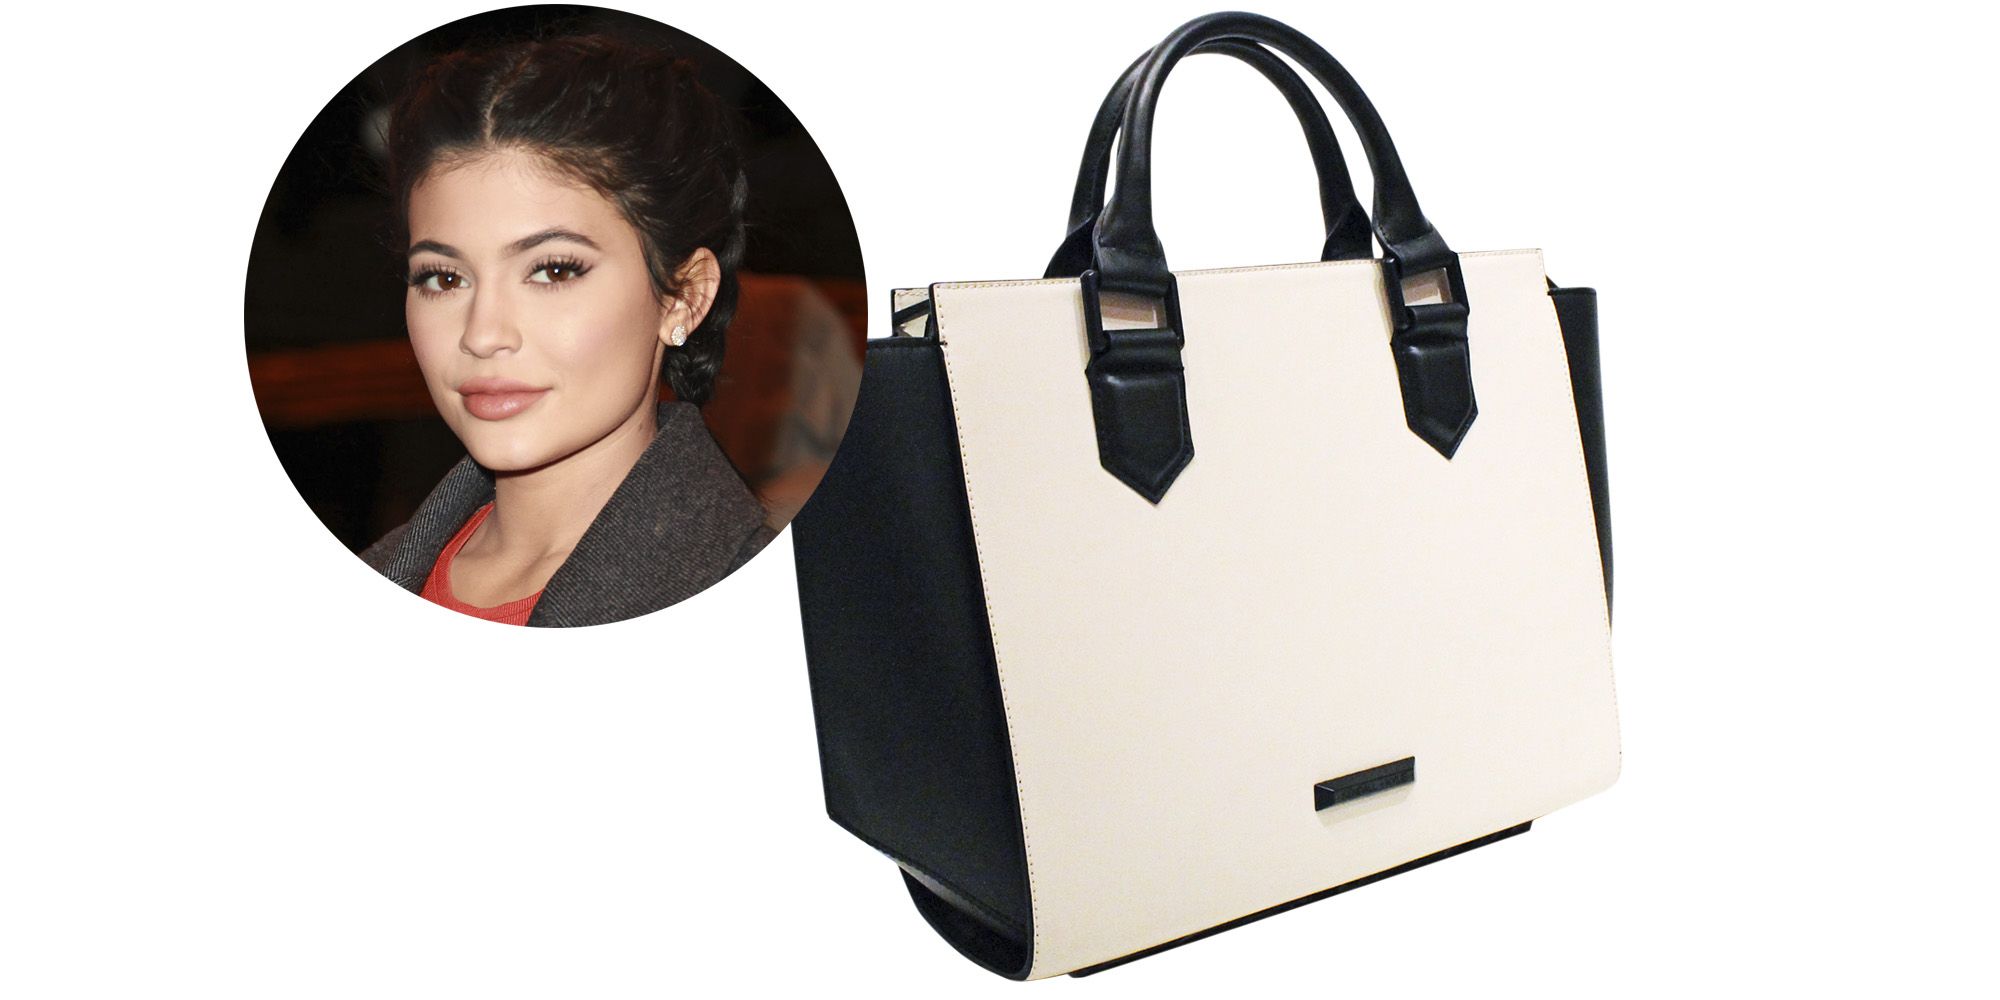 Would you dare to carry Kylie Jenner's glass purse?